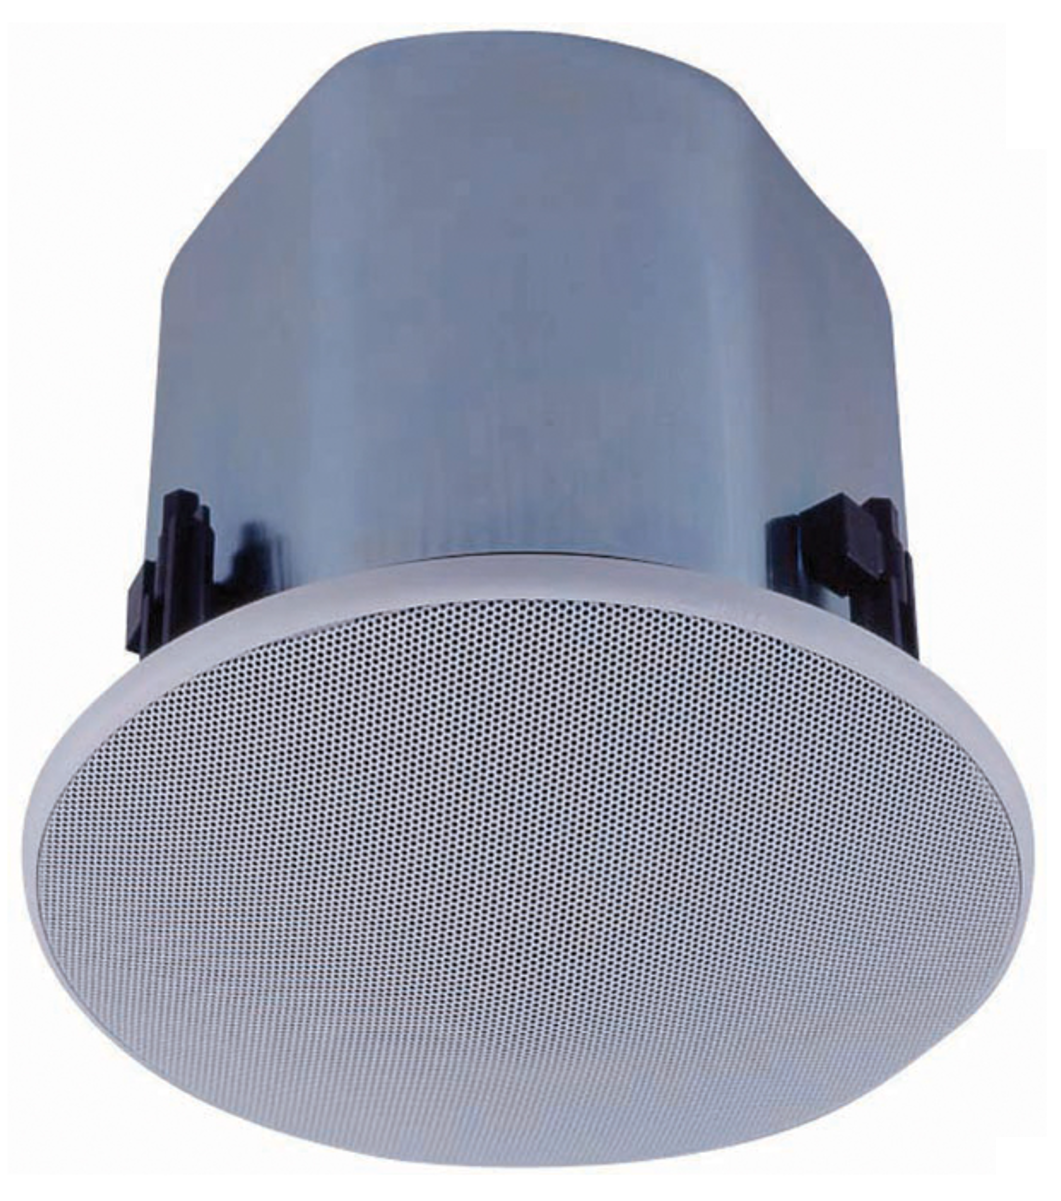 TOA WIDE DISPERSION 2-WAY SPEAKER 30W CEILING MOUNTED 90dB 70Hz - 20kHz 200MM MOUNTED HOLE WHITE 3.7KG